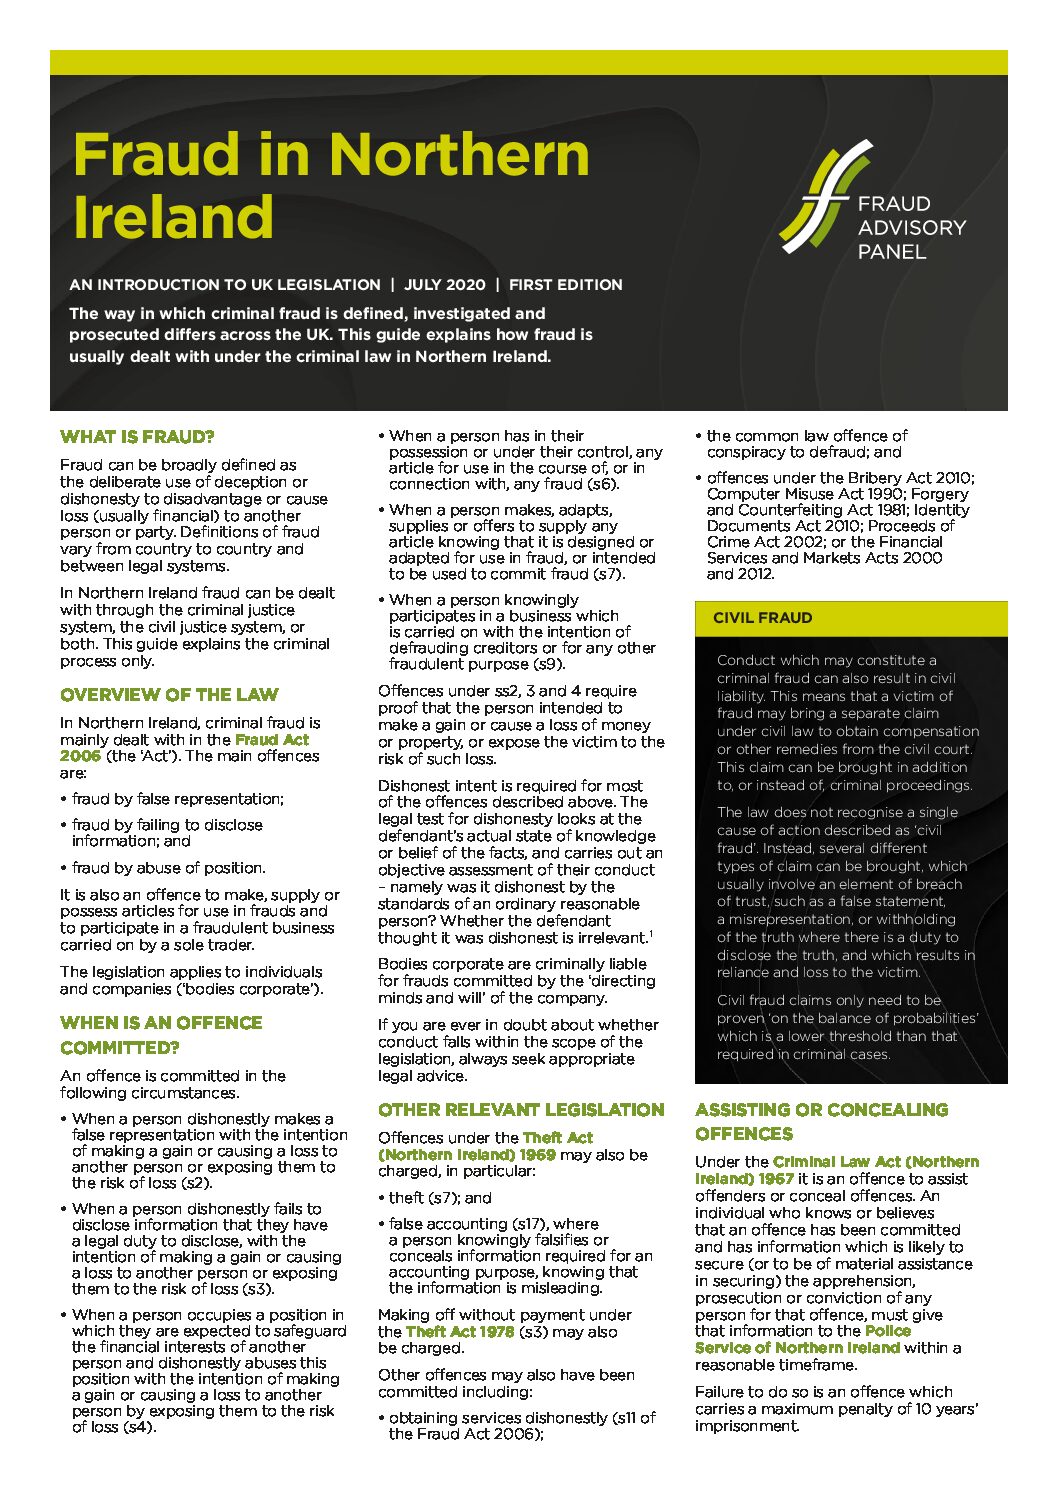 Fraud-in-Northern-Ireland-1st-ed-July2020 document cover